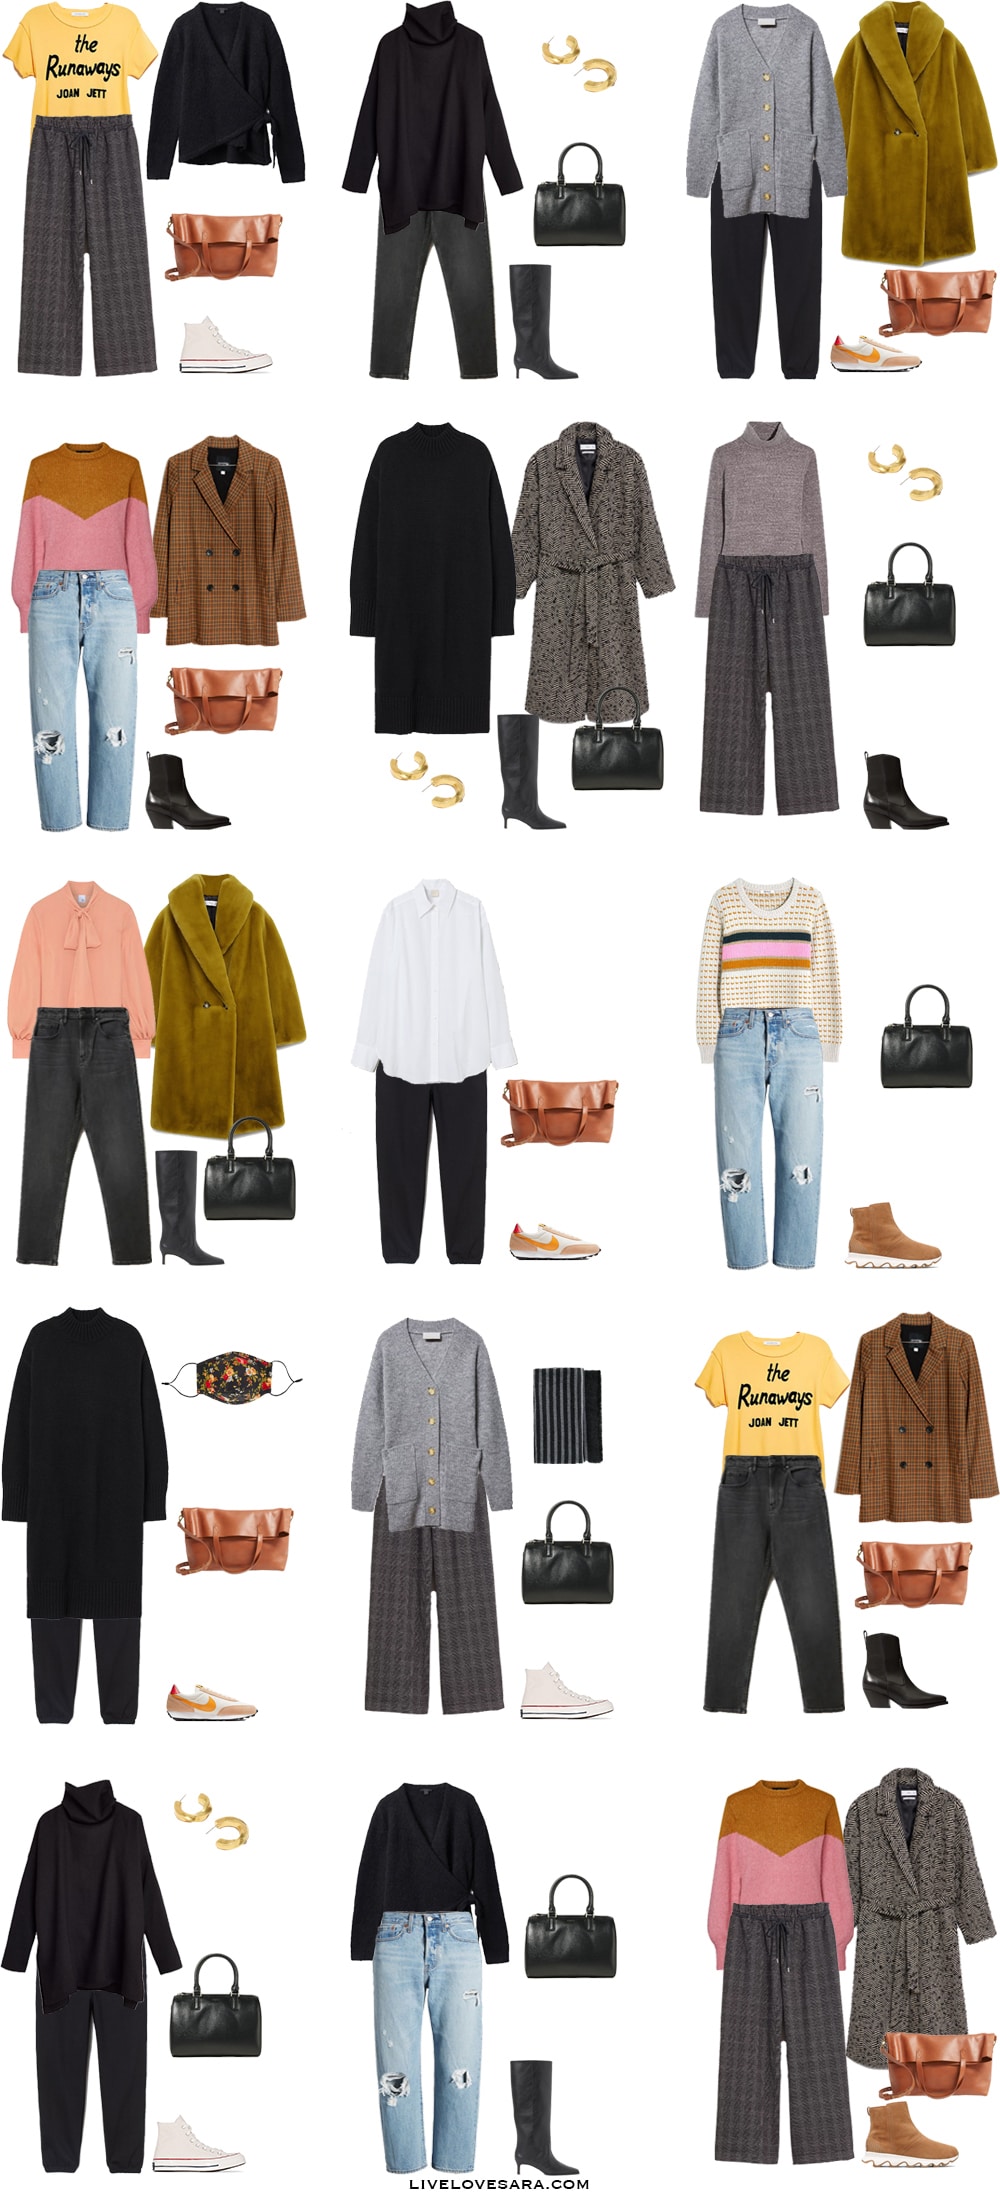 The Essential Capsule Wardrobe for Winter Outfit ideas 1-15 2020